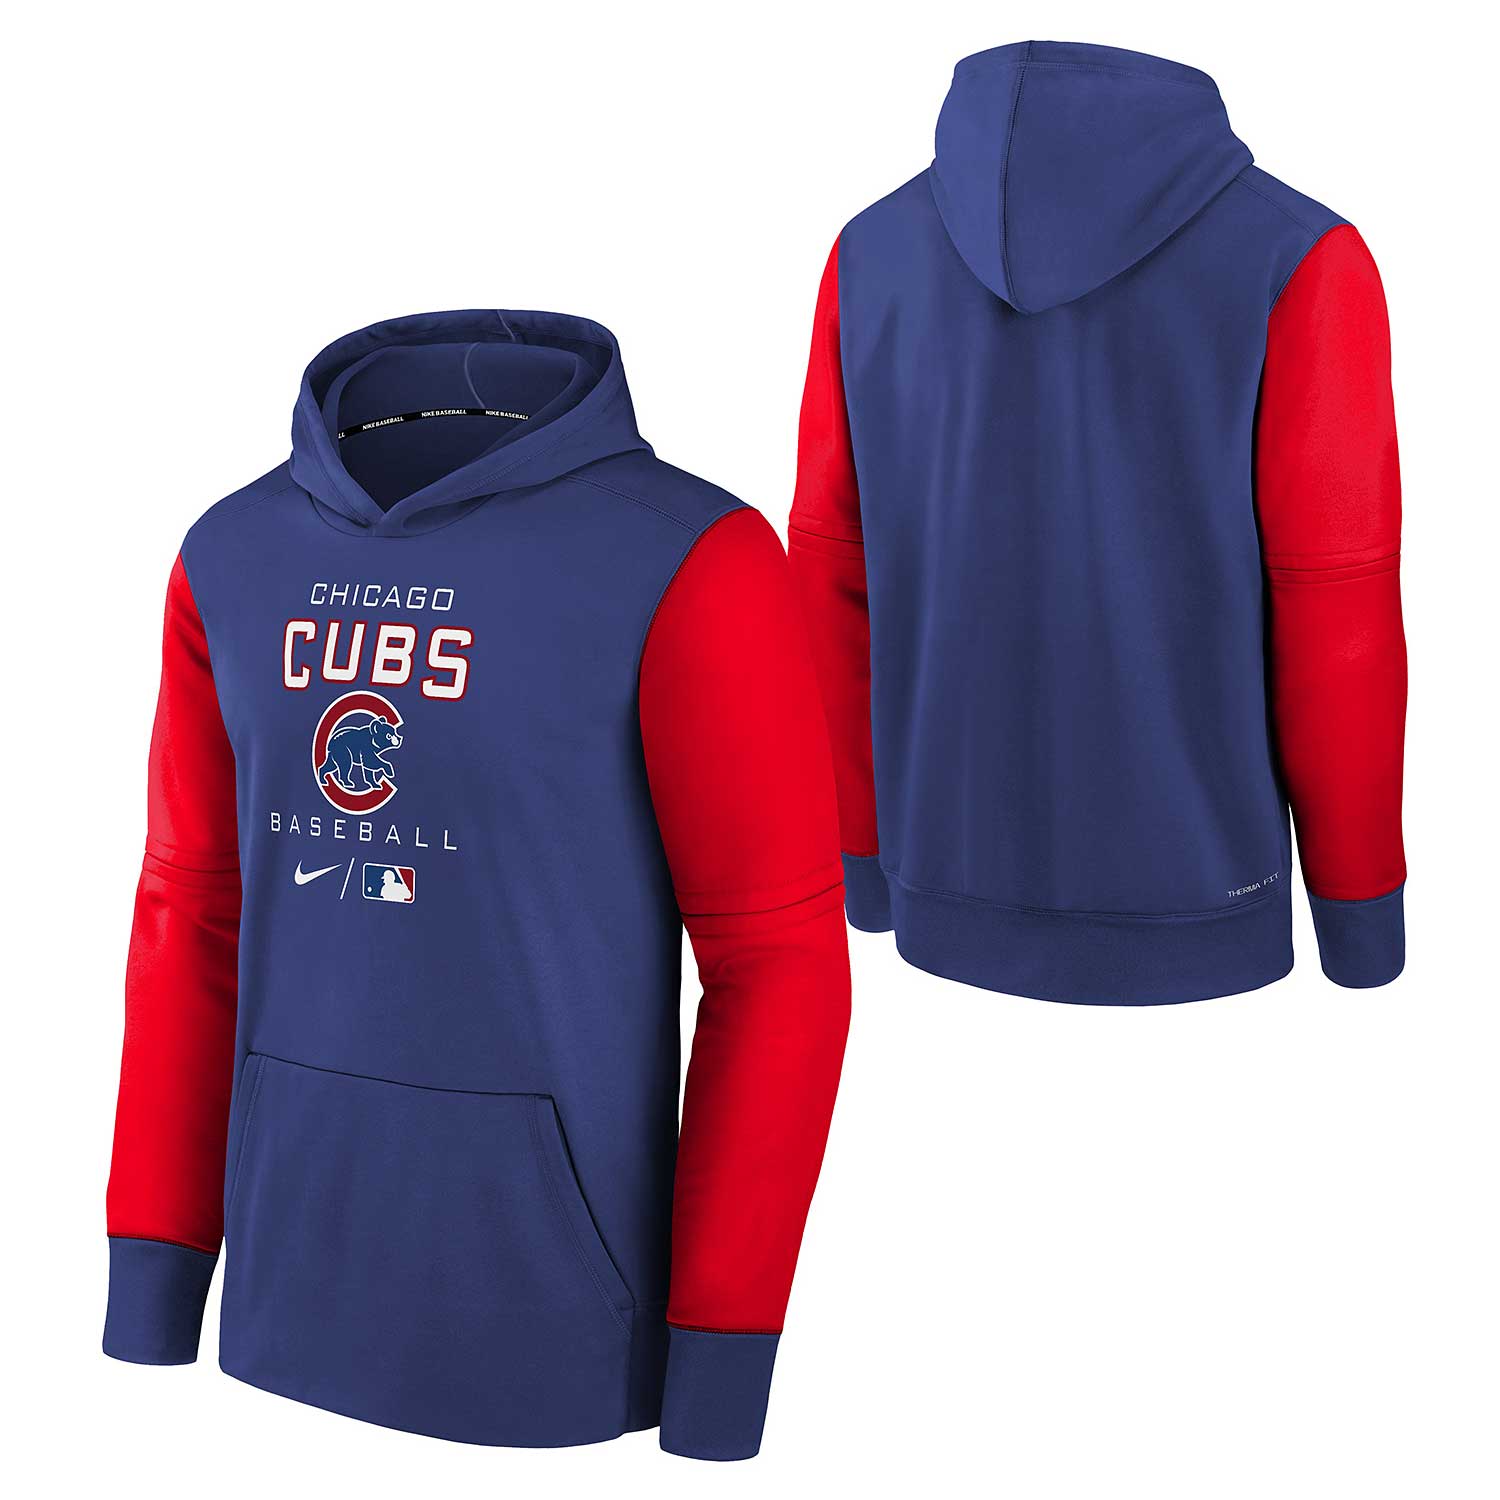 Chicago Cubs Youth Nike AC Therma Hooded Sweatshirt X-Large = 18-20